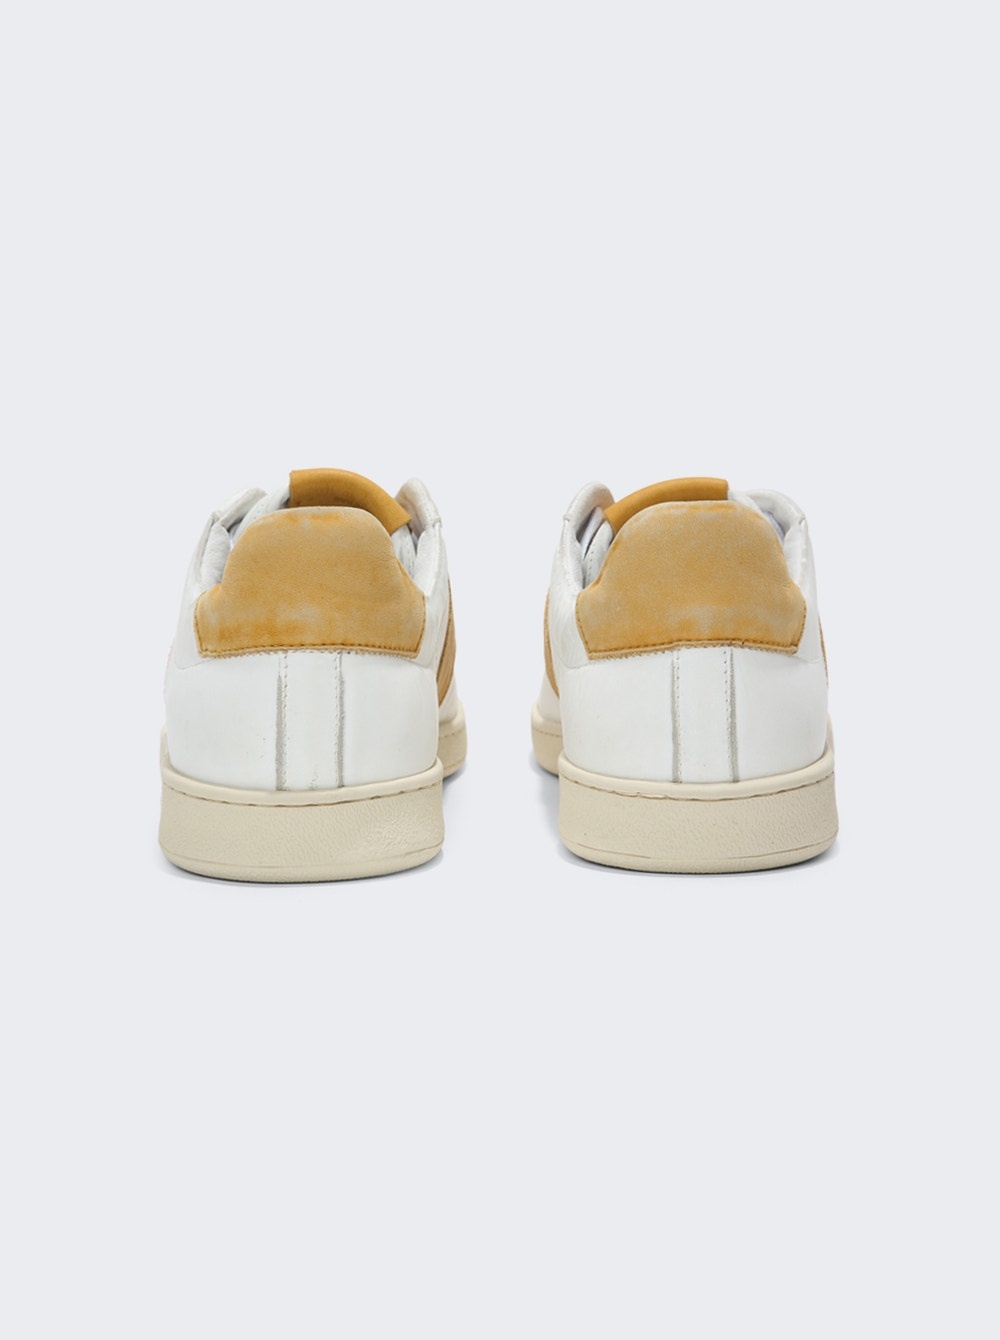 Court Low Top Sneakers White and Mustard - 3